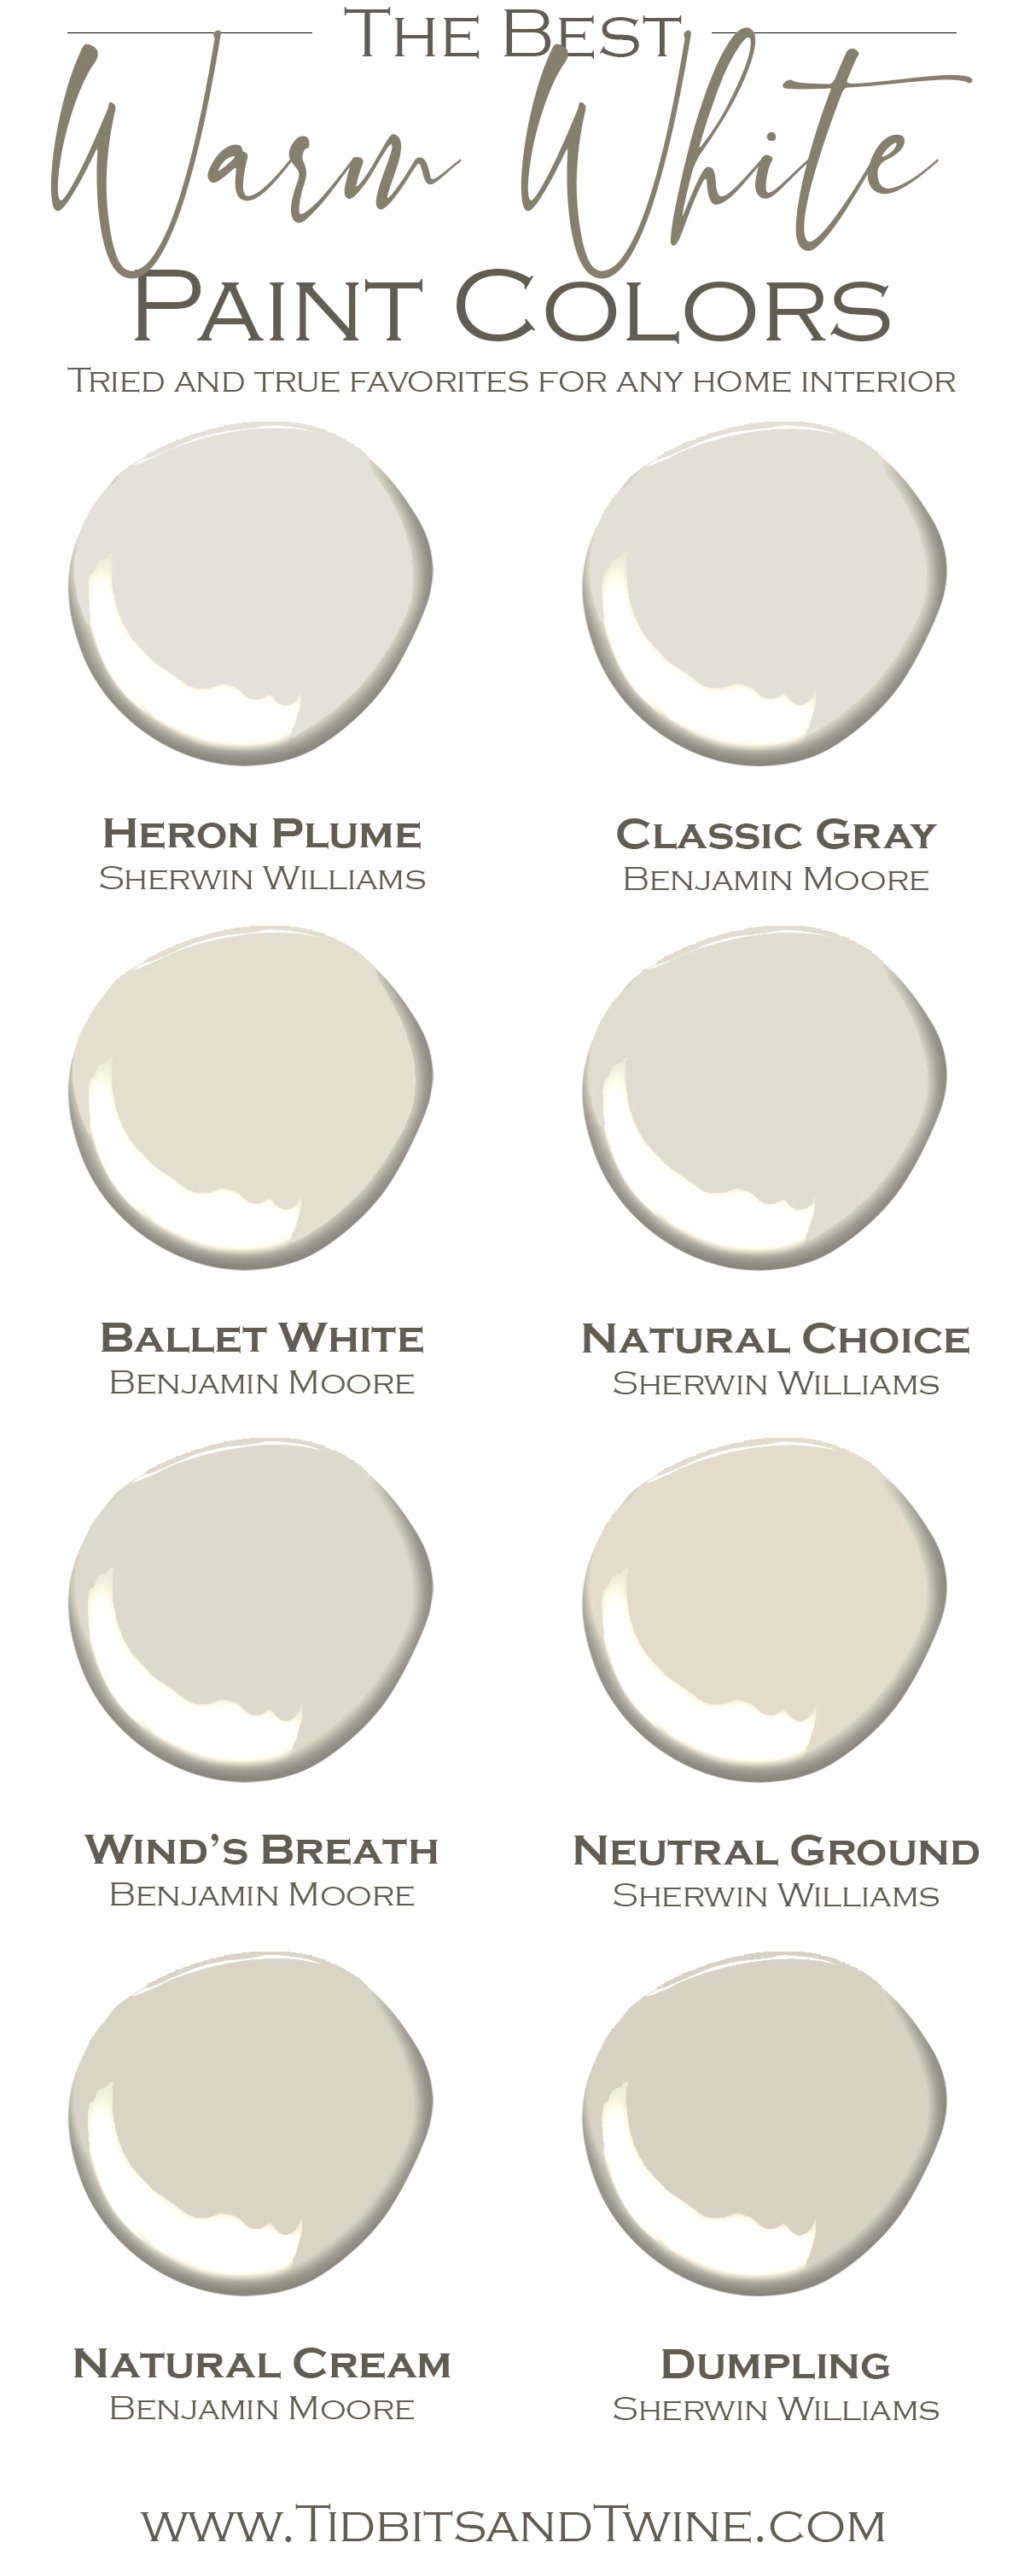 8 Beautiful Warm Whites for Your Home!